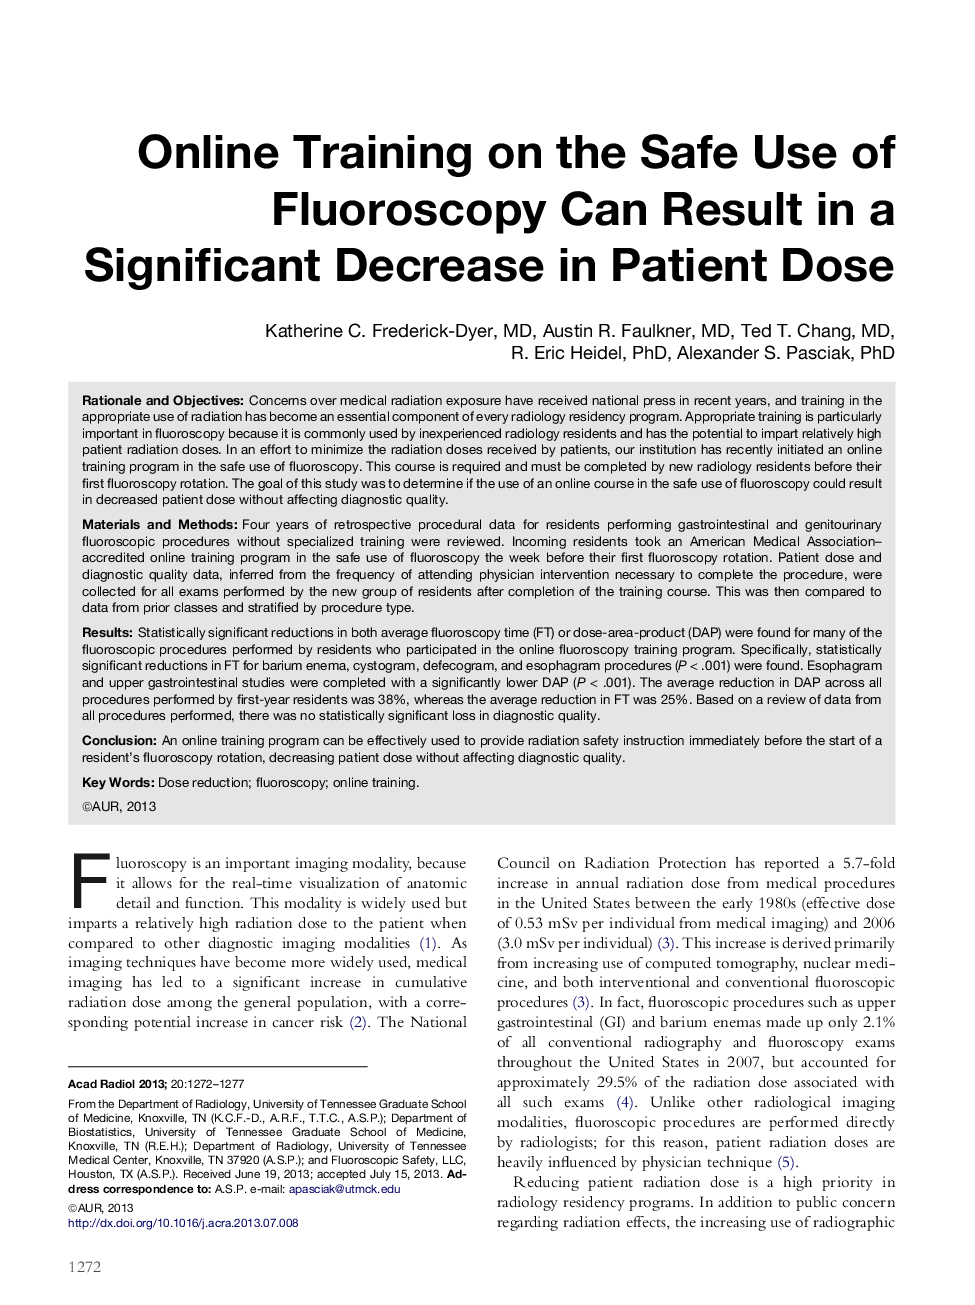 Online Training on the Safe Use of Fluoroscopy Can Result in a Significant Decrease in Patient Dose